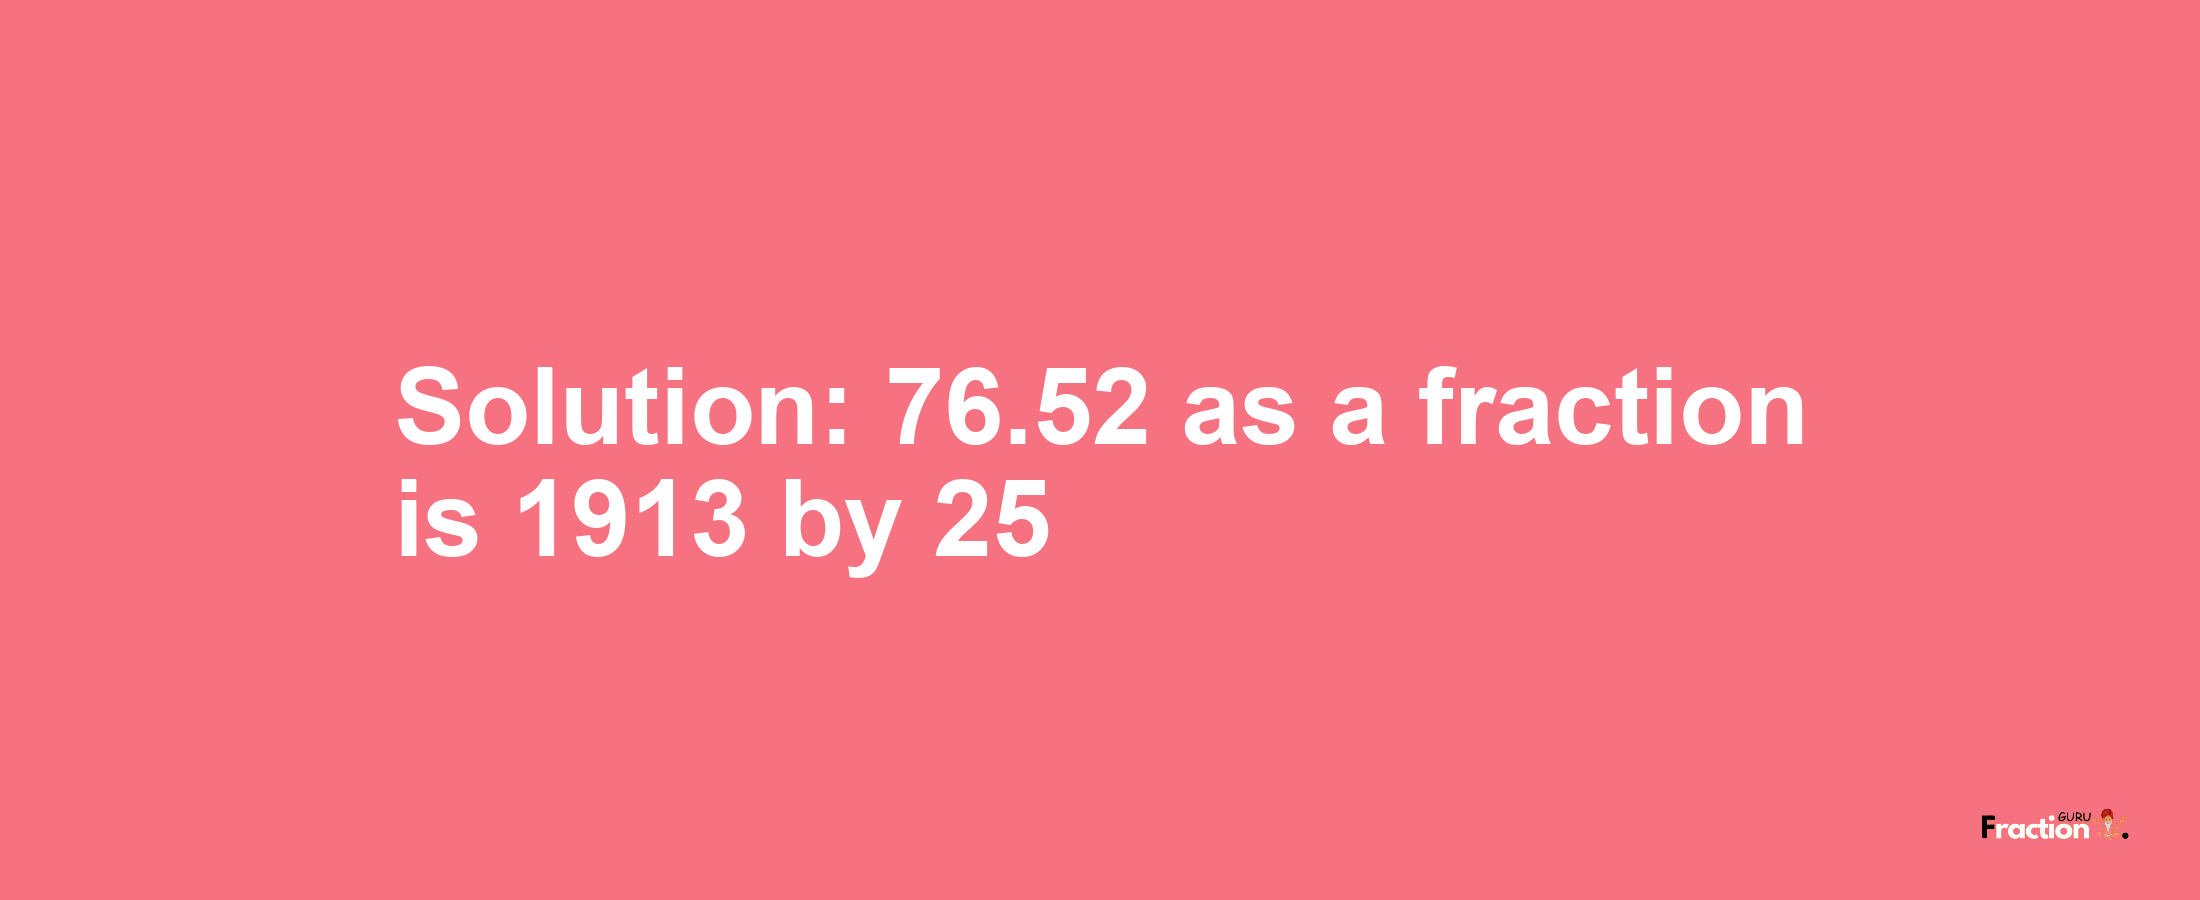 Solution:76.52 as a fraction is 1913/25